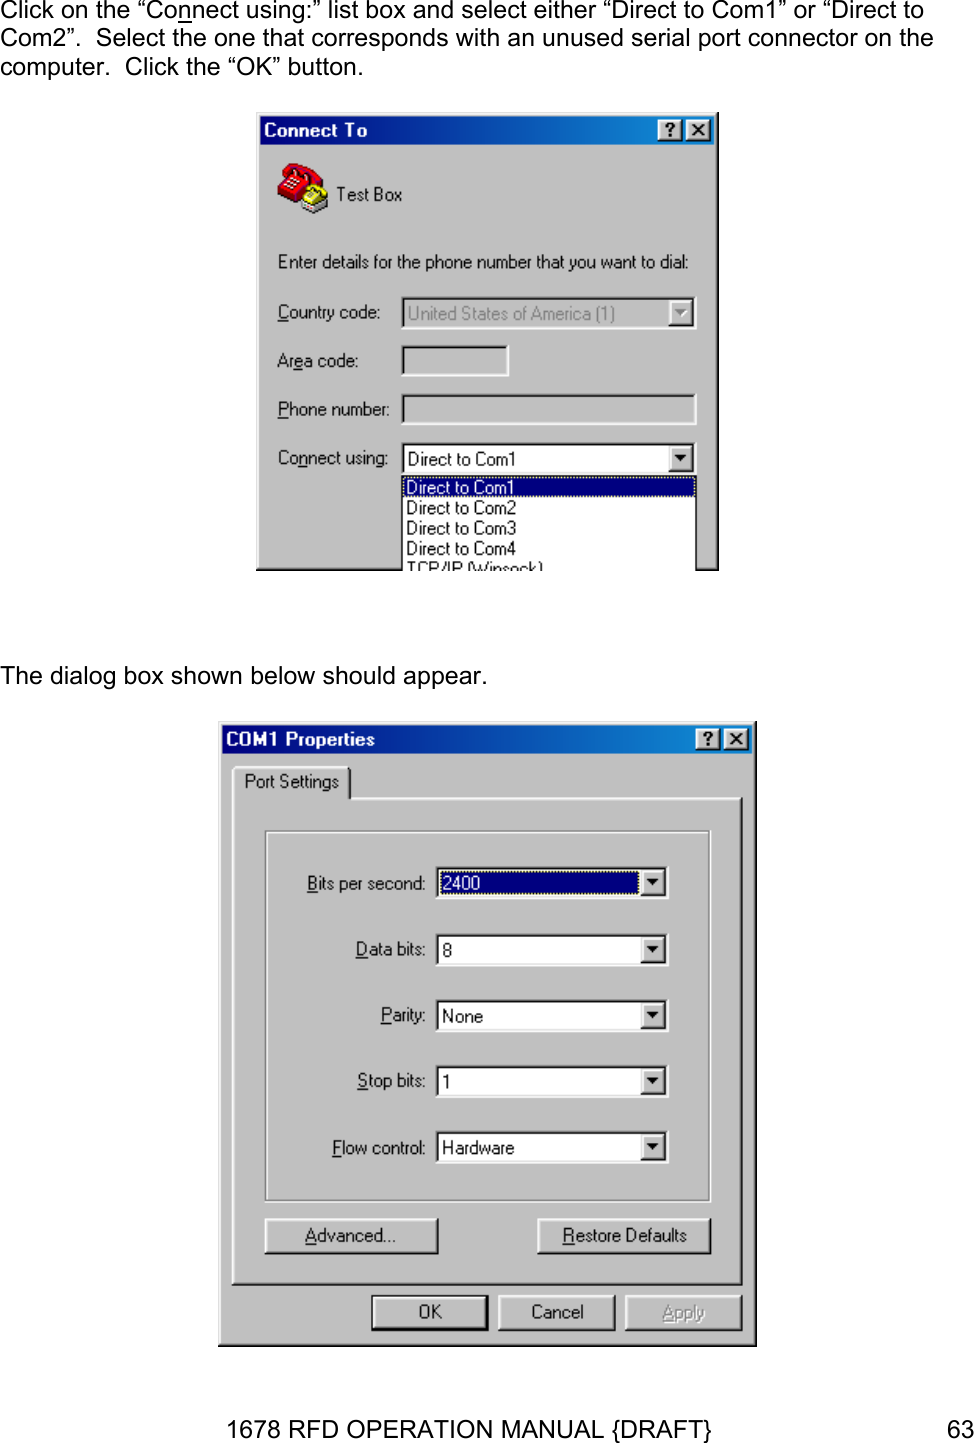 Click on the “Connect using:” list box and select either “Direct to Com1” or “Direct to Com2”.  Select the one that corresponds with an unused serial port connector on the computer.  Click the “OK” button.   The dialog box shown below should appear.  1678 RFD OPERATION MANUAL {DRAFT}  63